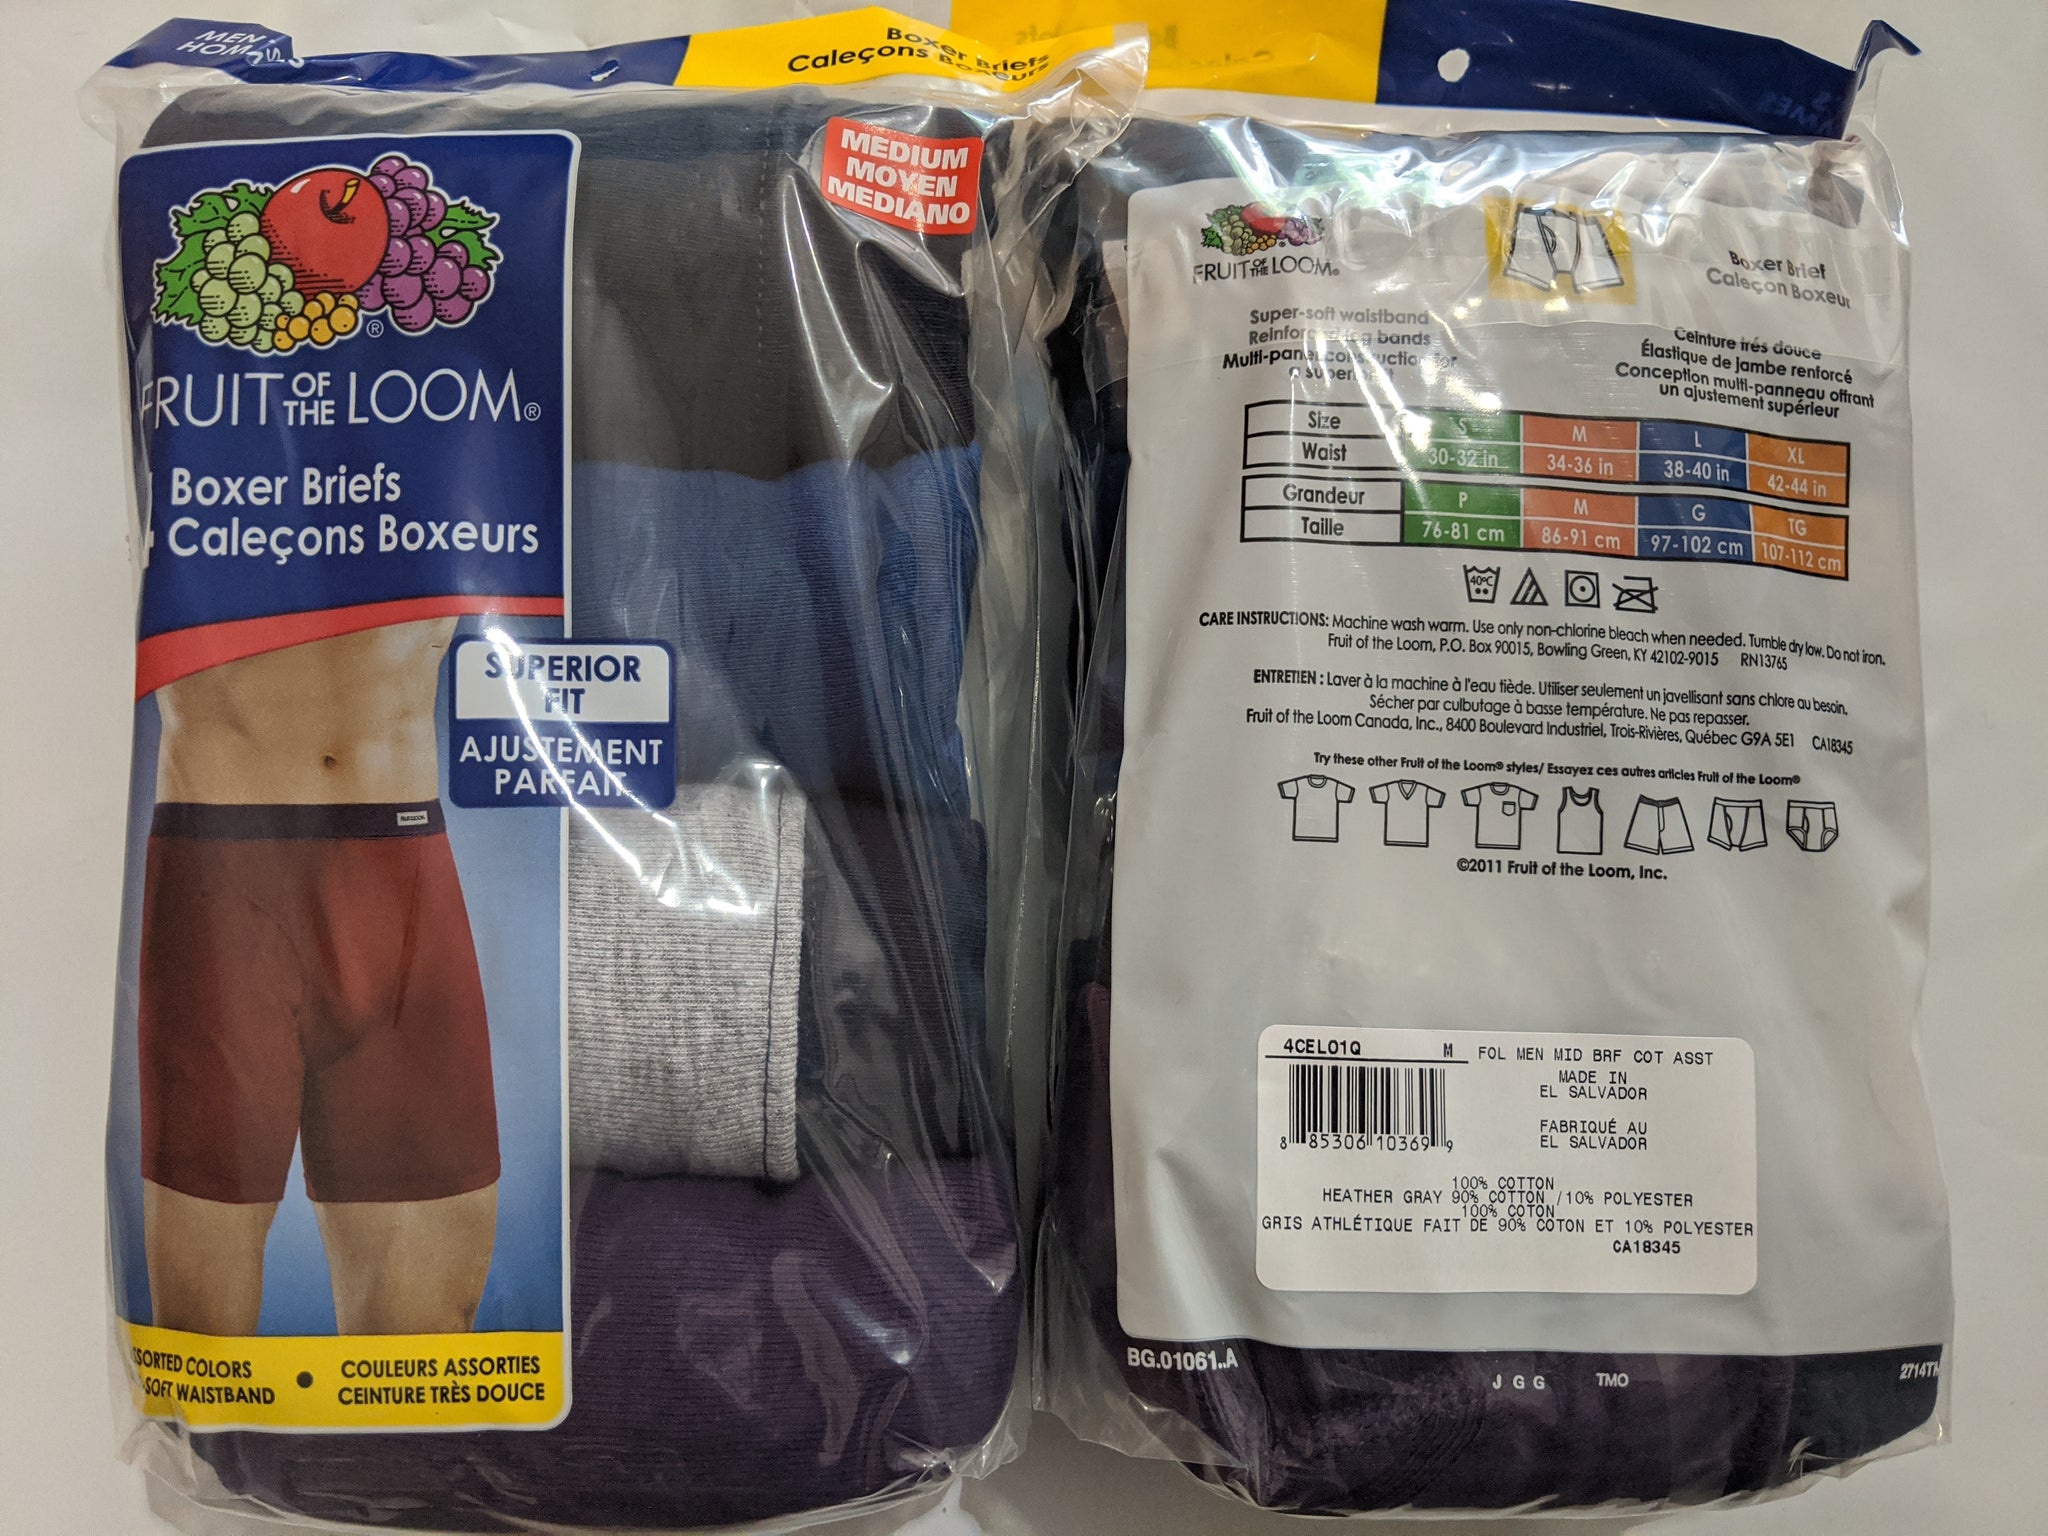 Fruit of the Loom Plush Soft Boxer Briefs 4 Pack